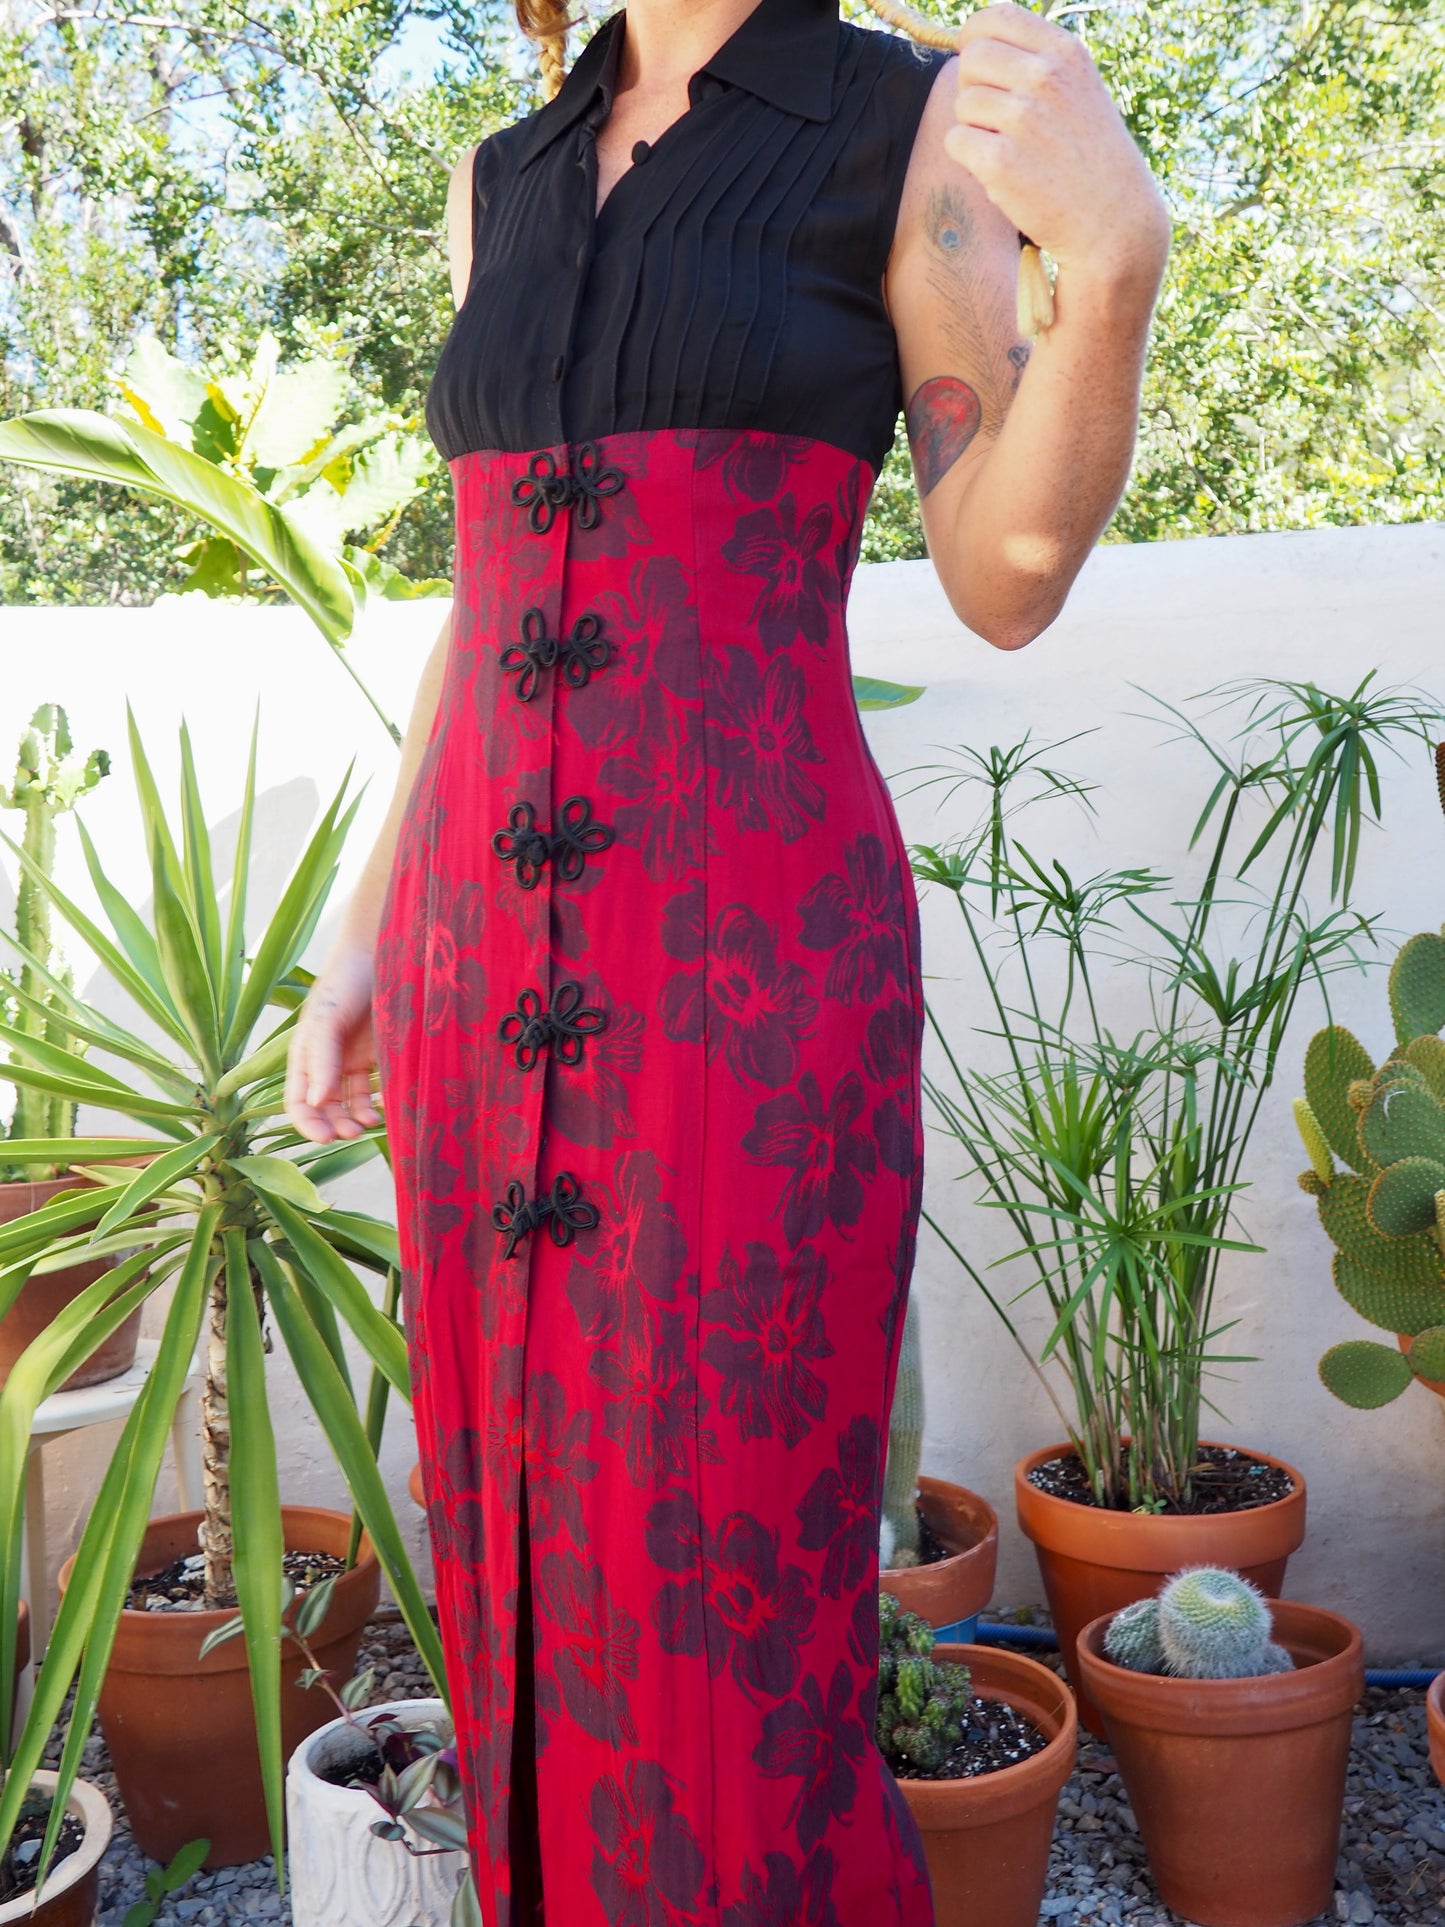 Vintage Chinese printed red and black dress super cool big button fastening details